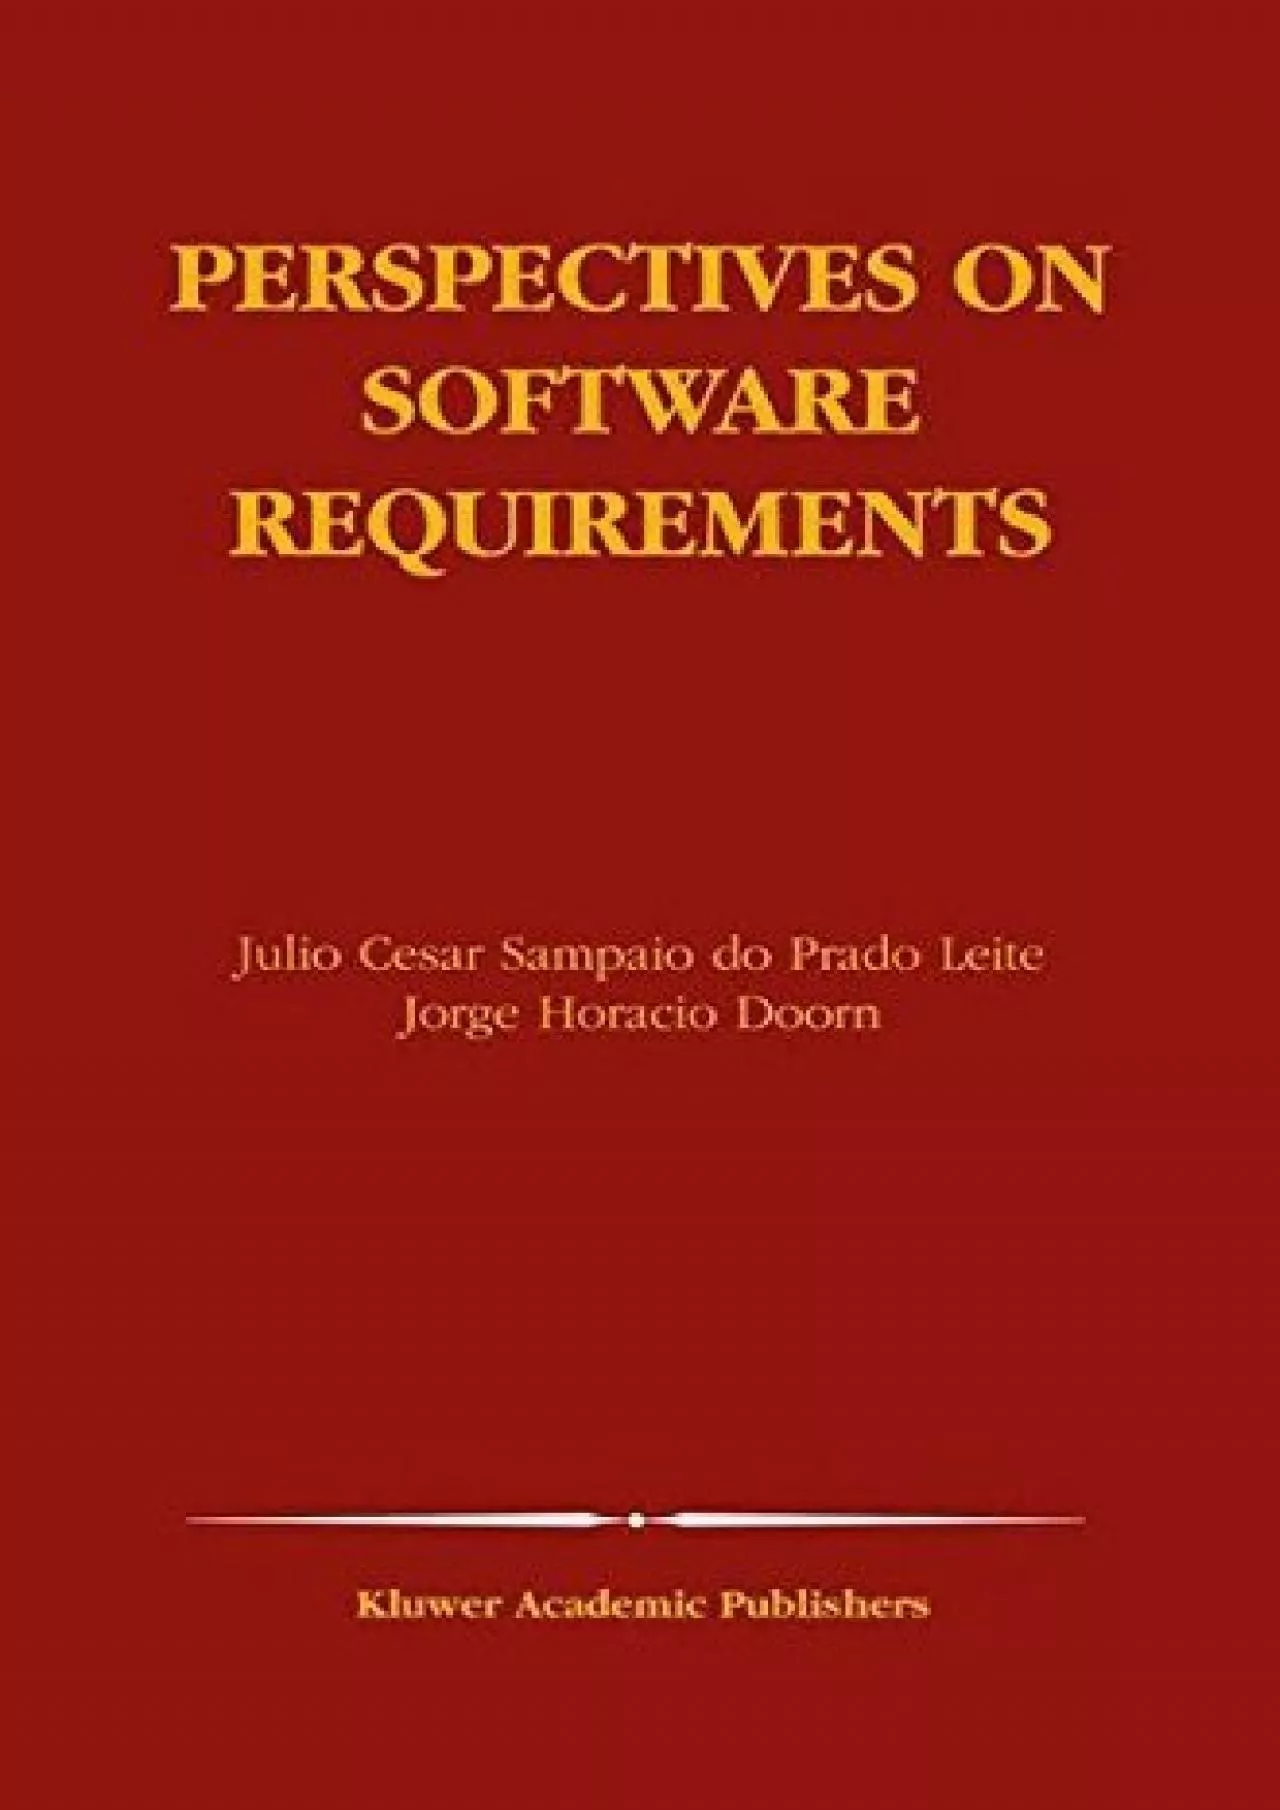 [BEST]-Perspectives on Software Requirements (The Springer International Series in Engineering